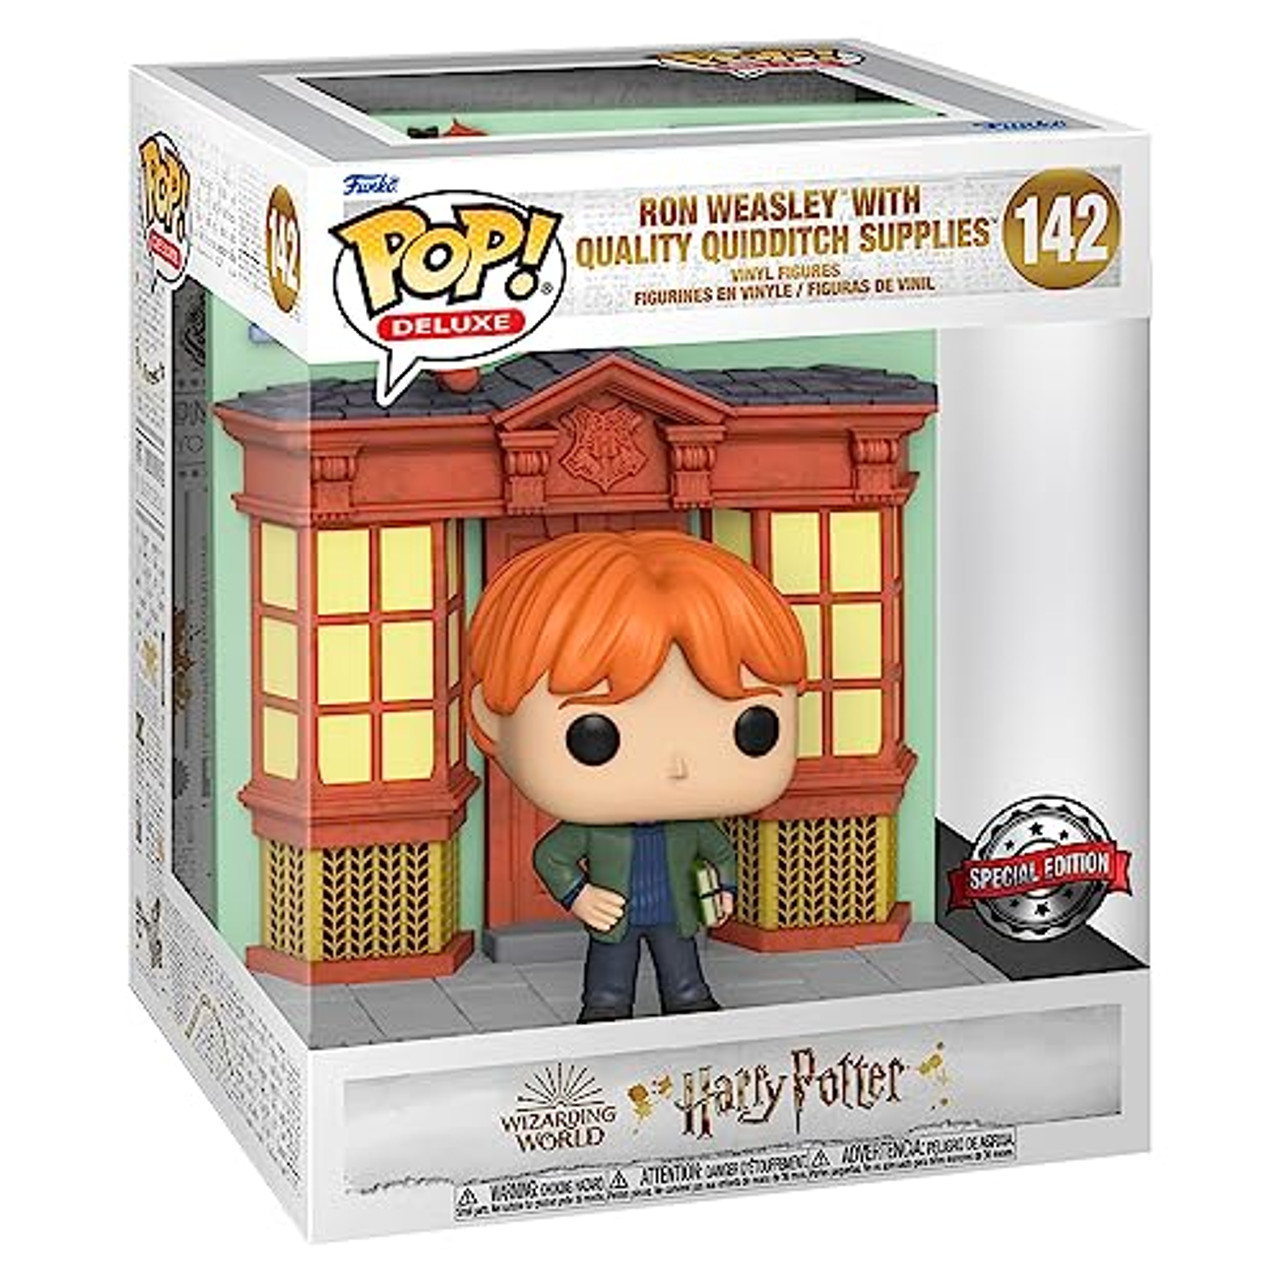 Funko Pop! Deluxe: Harry Potter Quidditch Supplies Store with Ron Weasley  #142